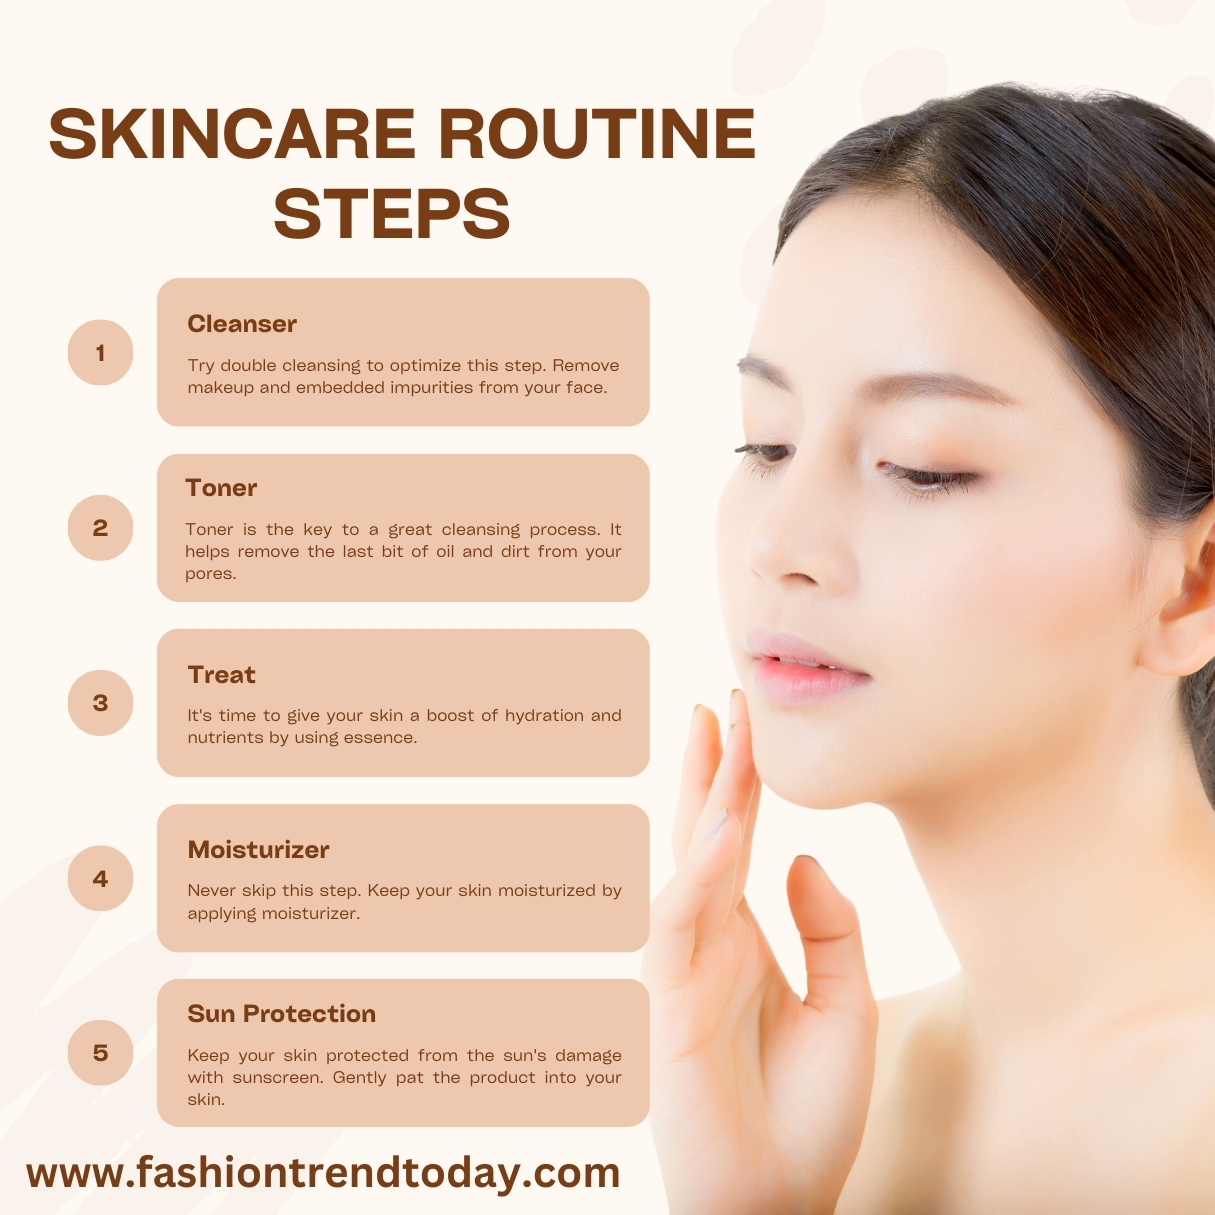 Skin Care Routine Steps Your Journey to Timeless Beauty